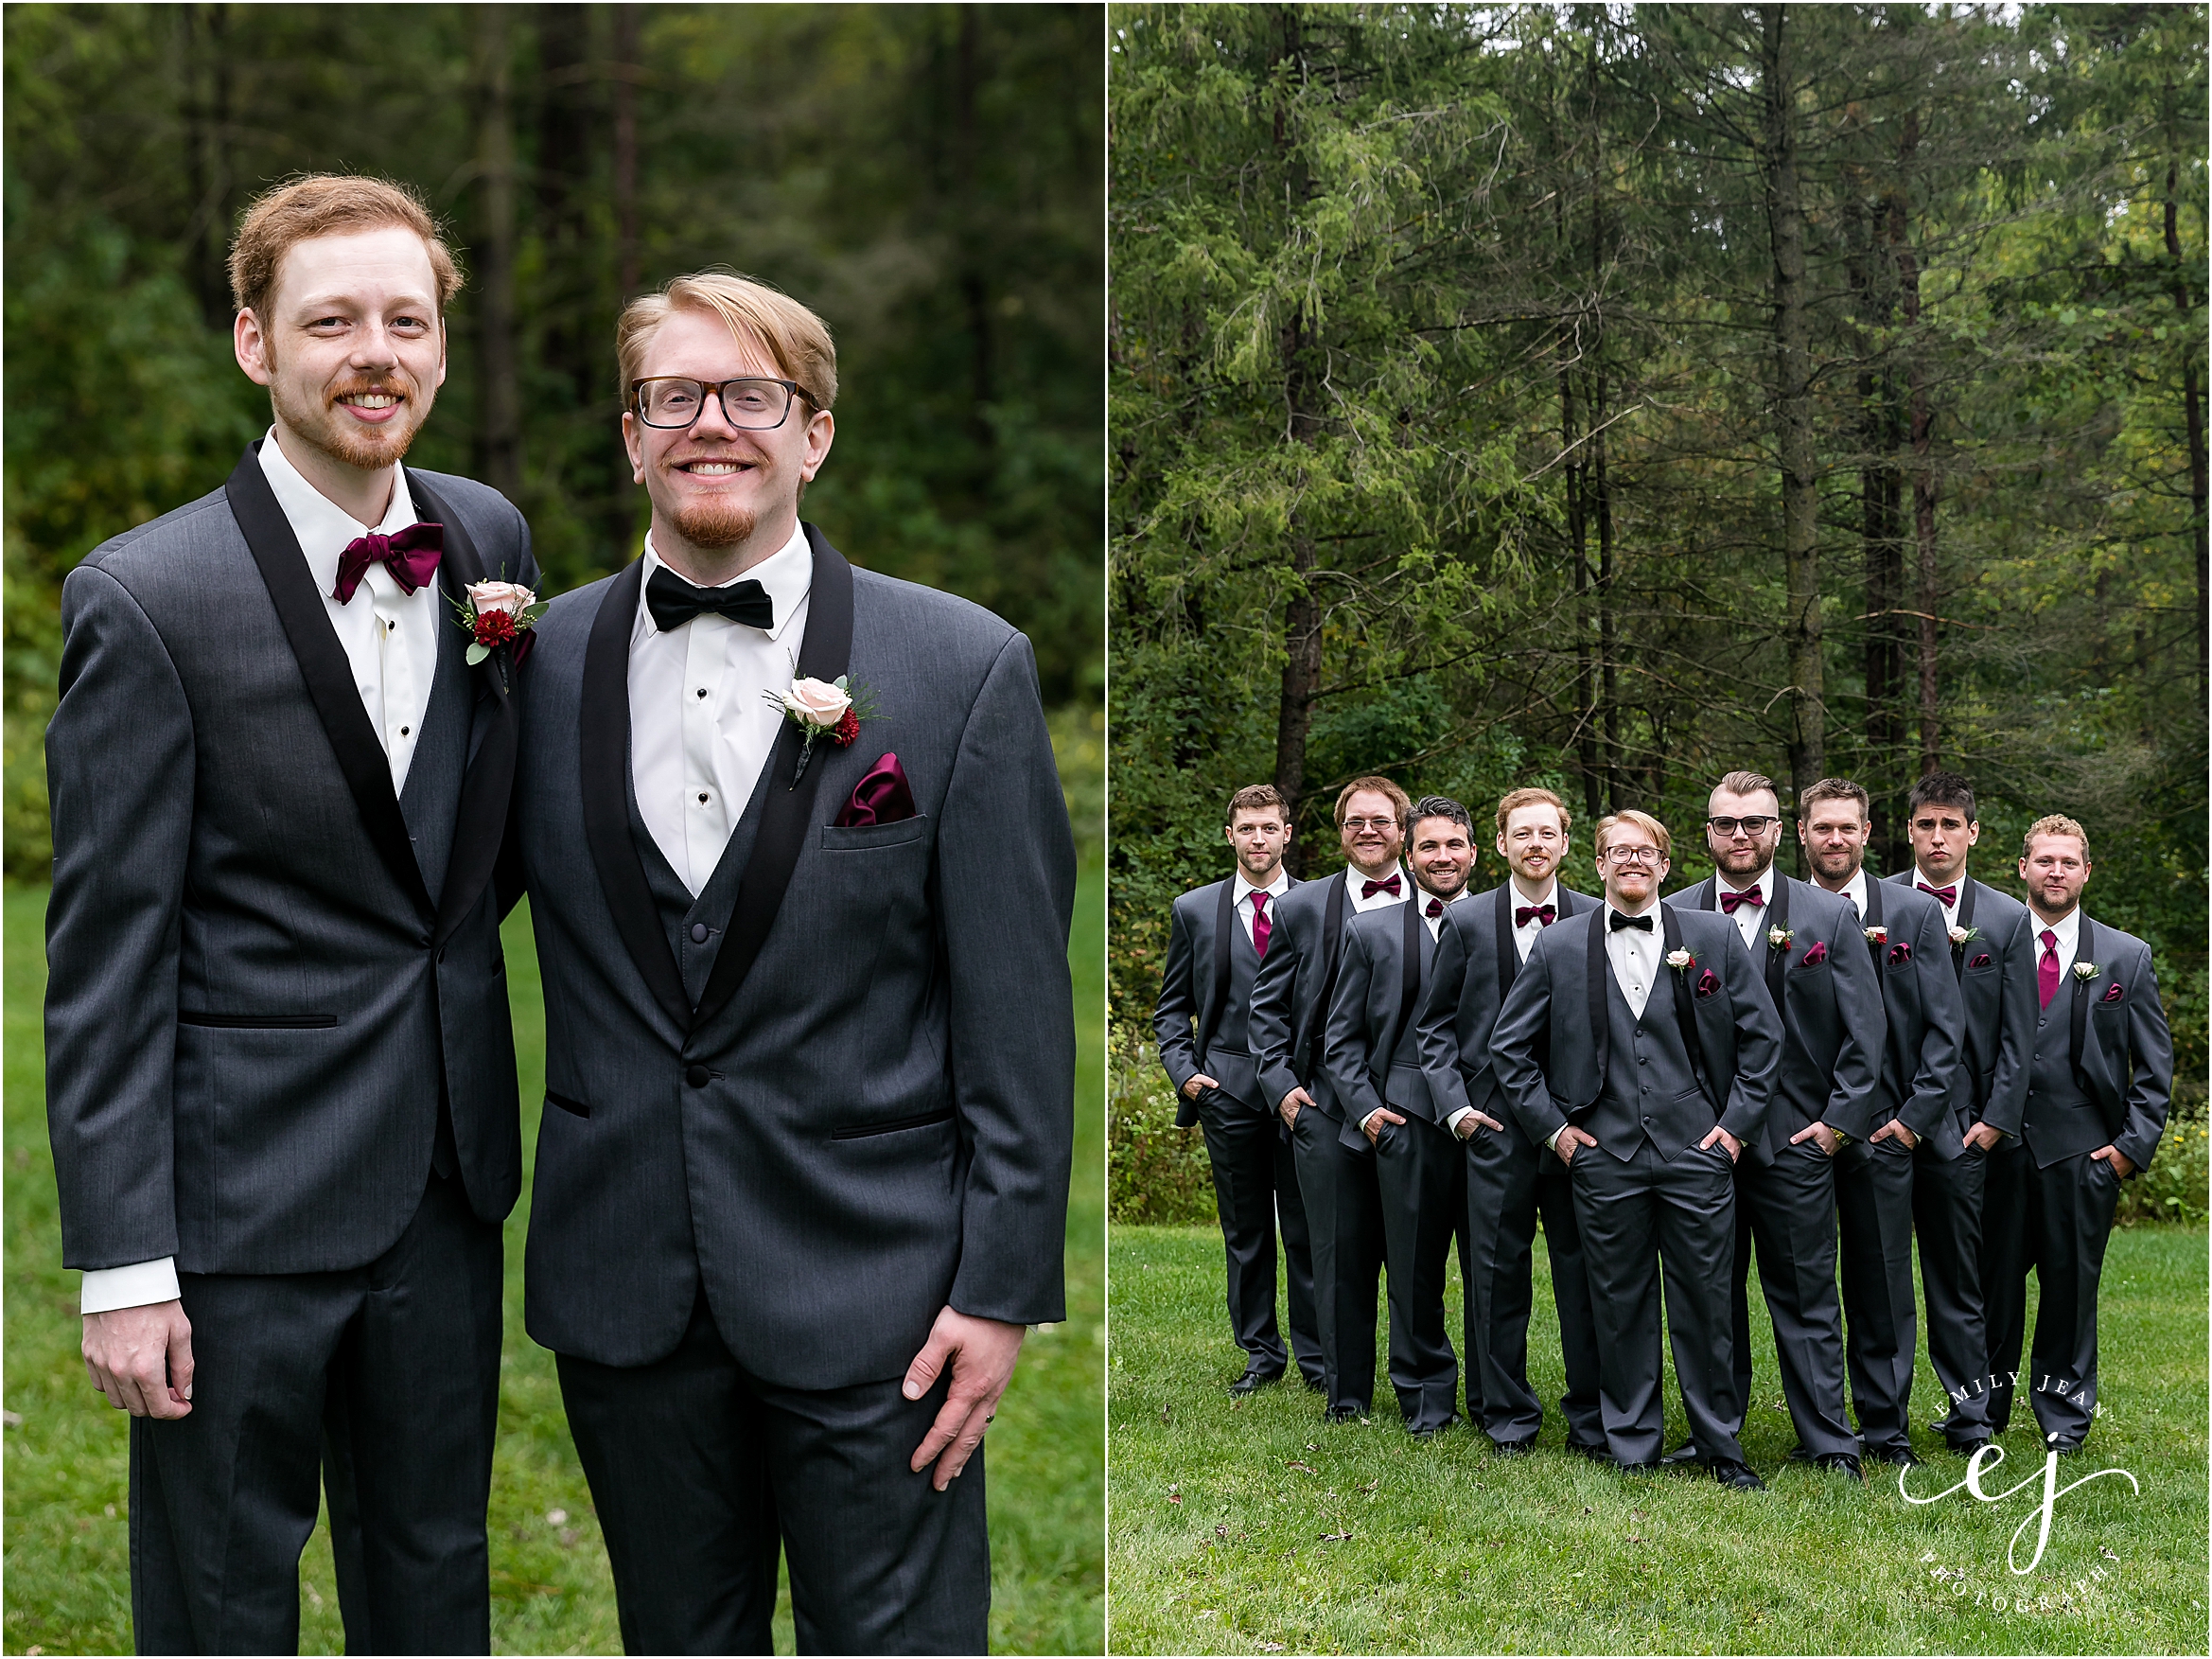 grey tux with black lapel 3 piece suite tuxedo groom with pink boutonniere standing with groomsmen